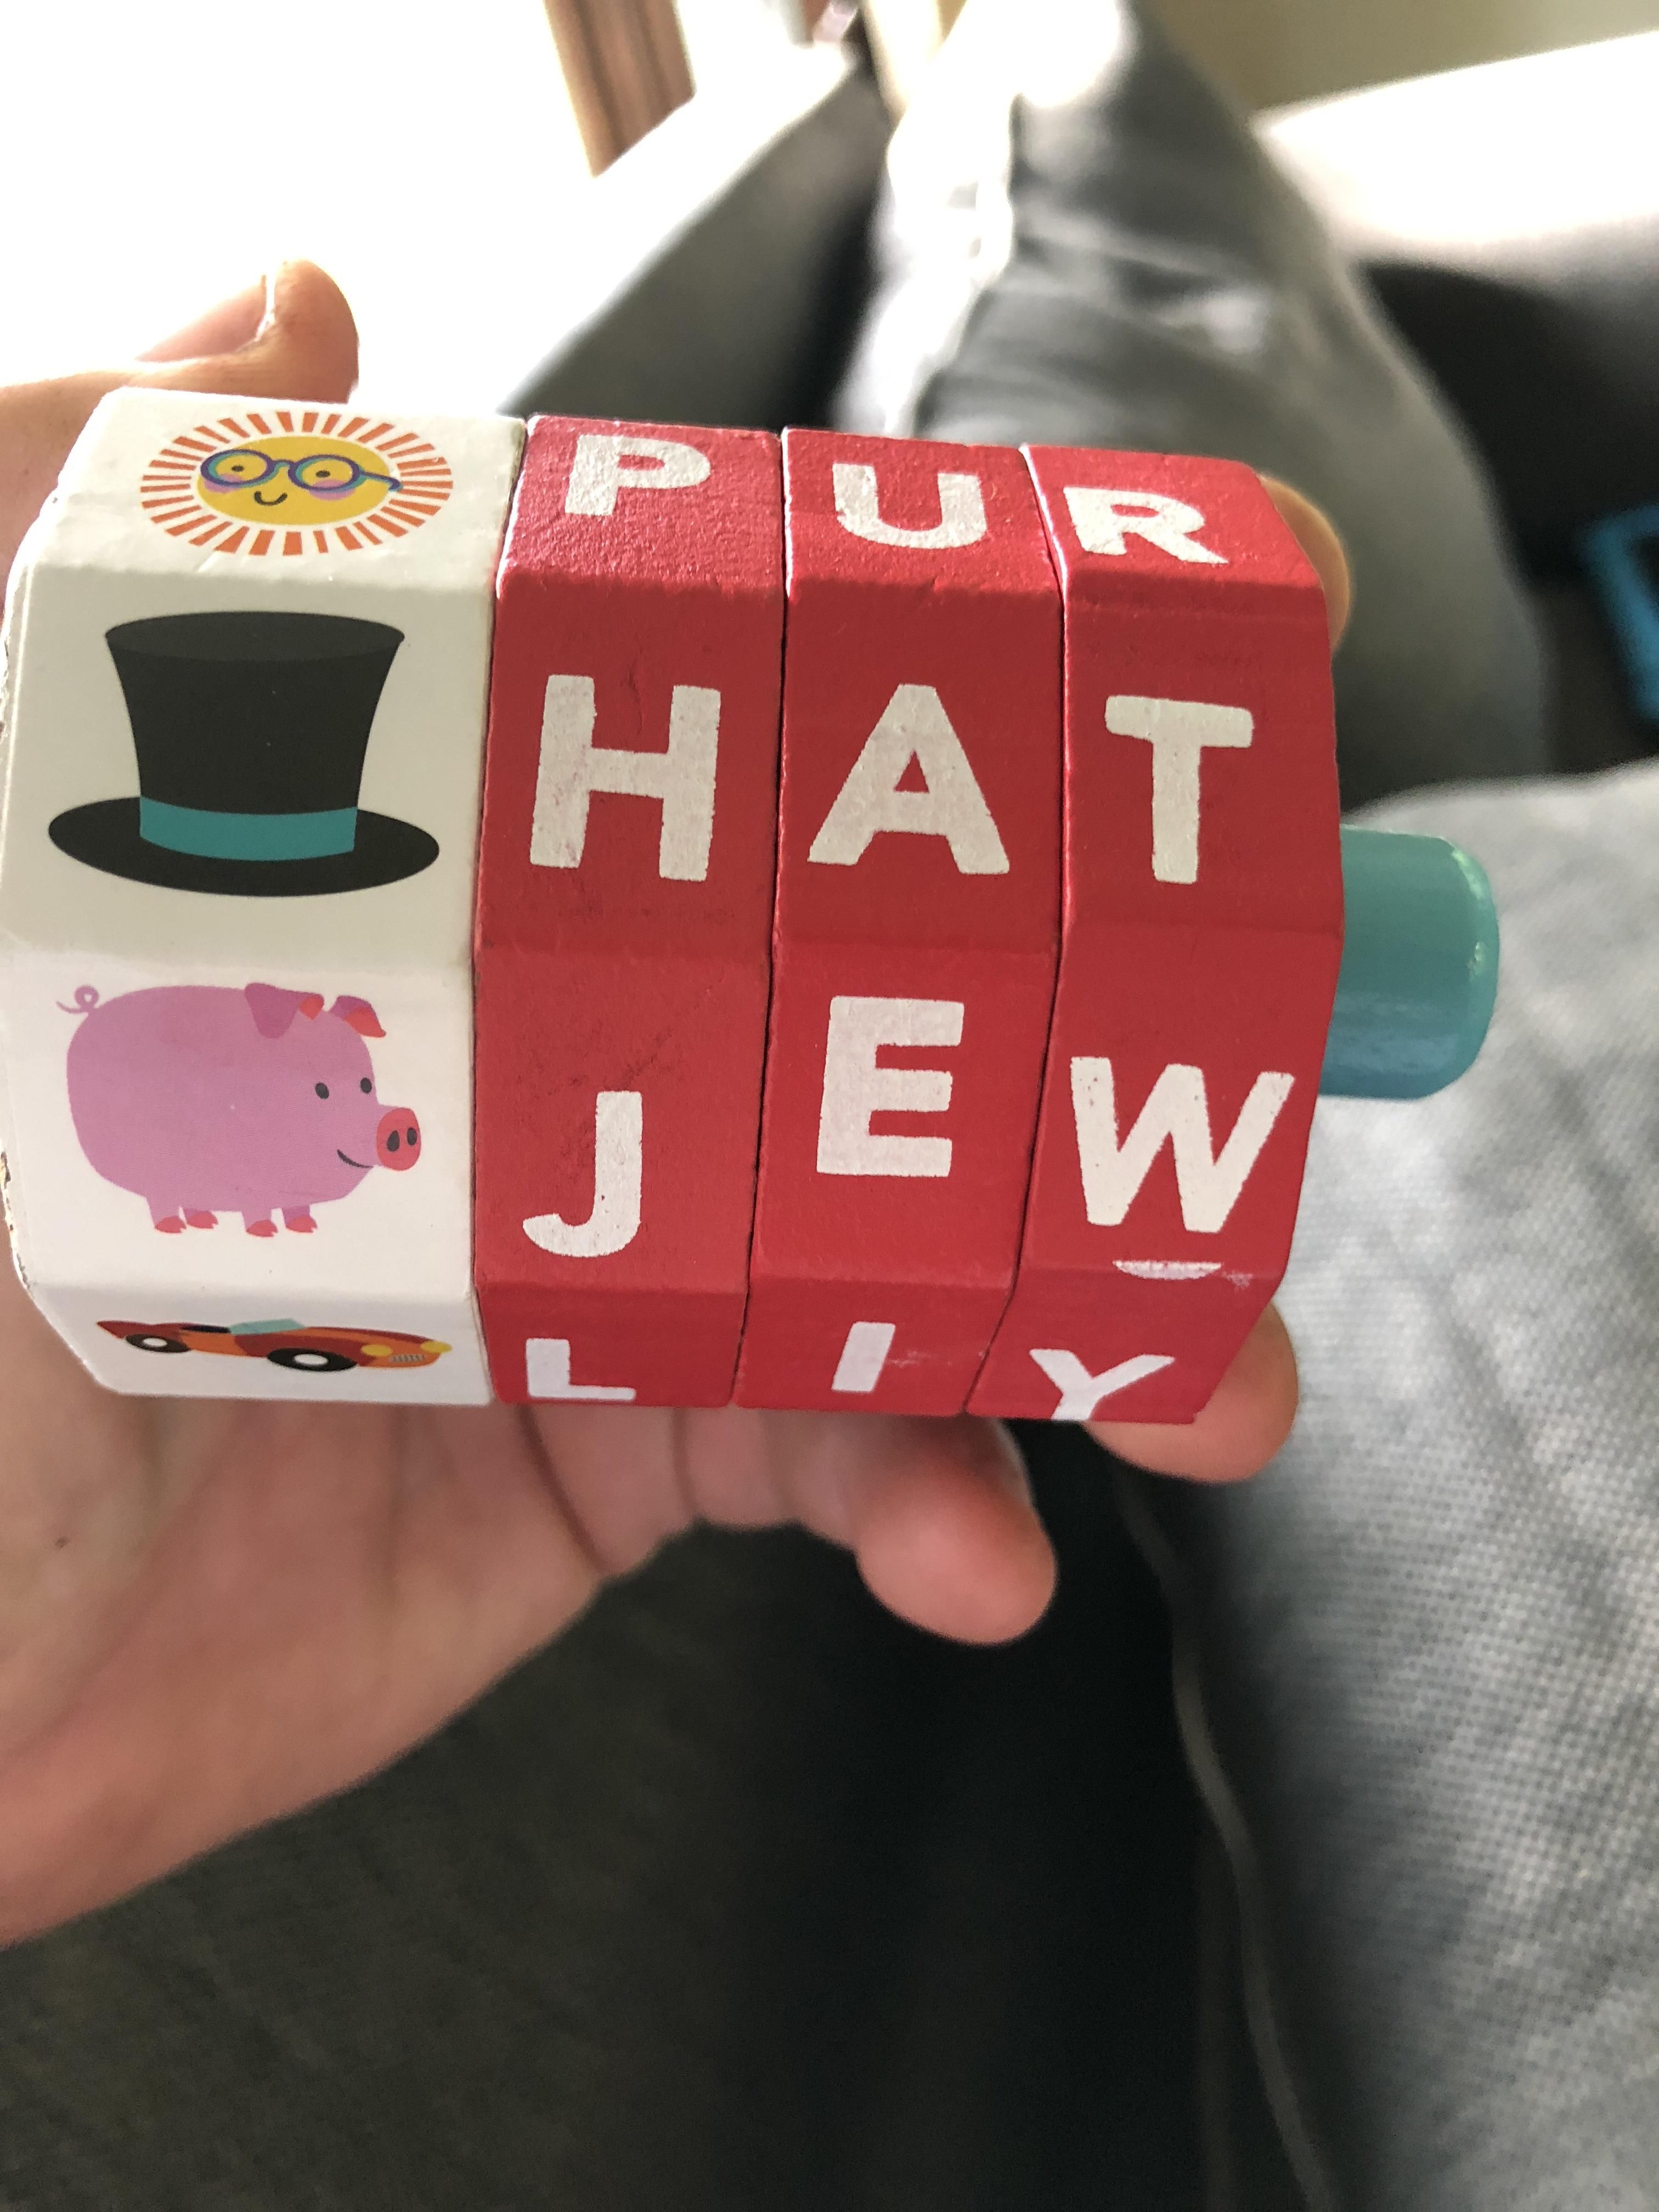 My son spelled hat on his new toy